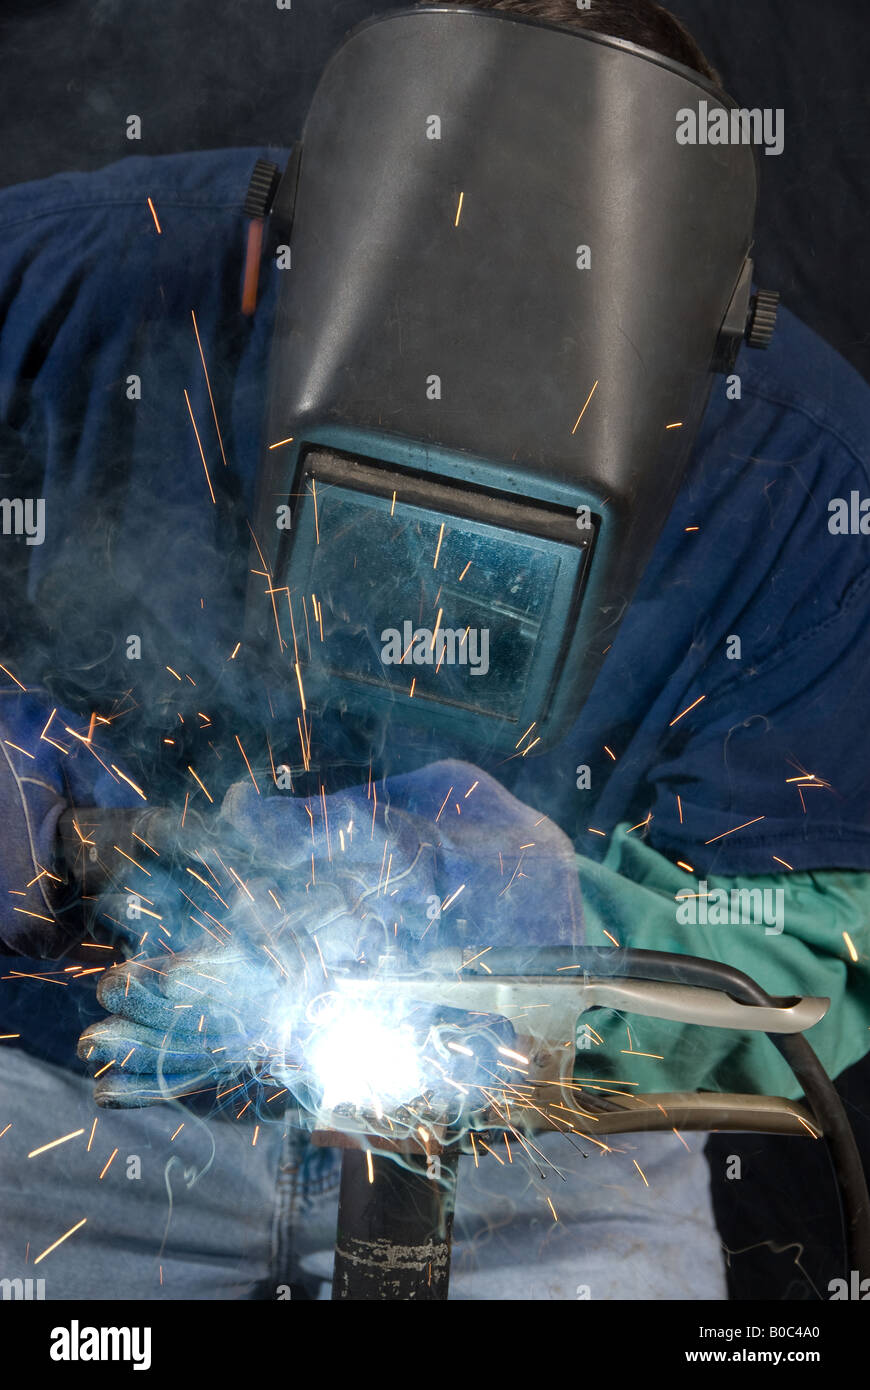 A welder fabricates a tool by attaching two pieces of metal Stock Photo